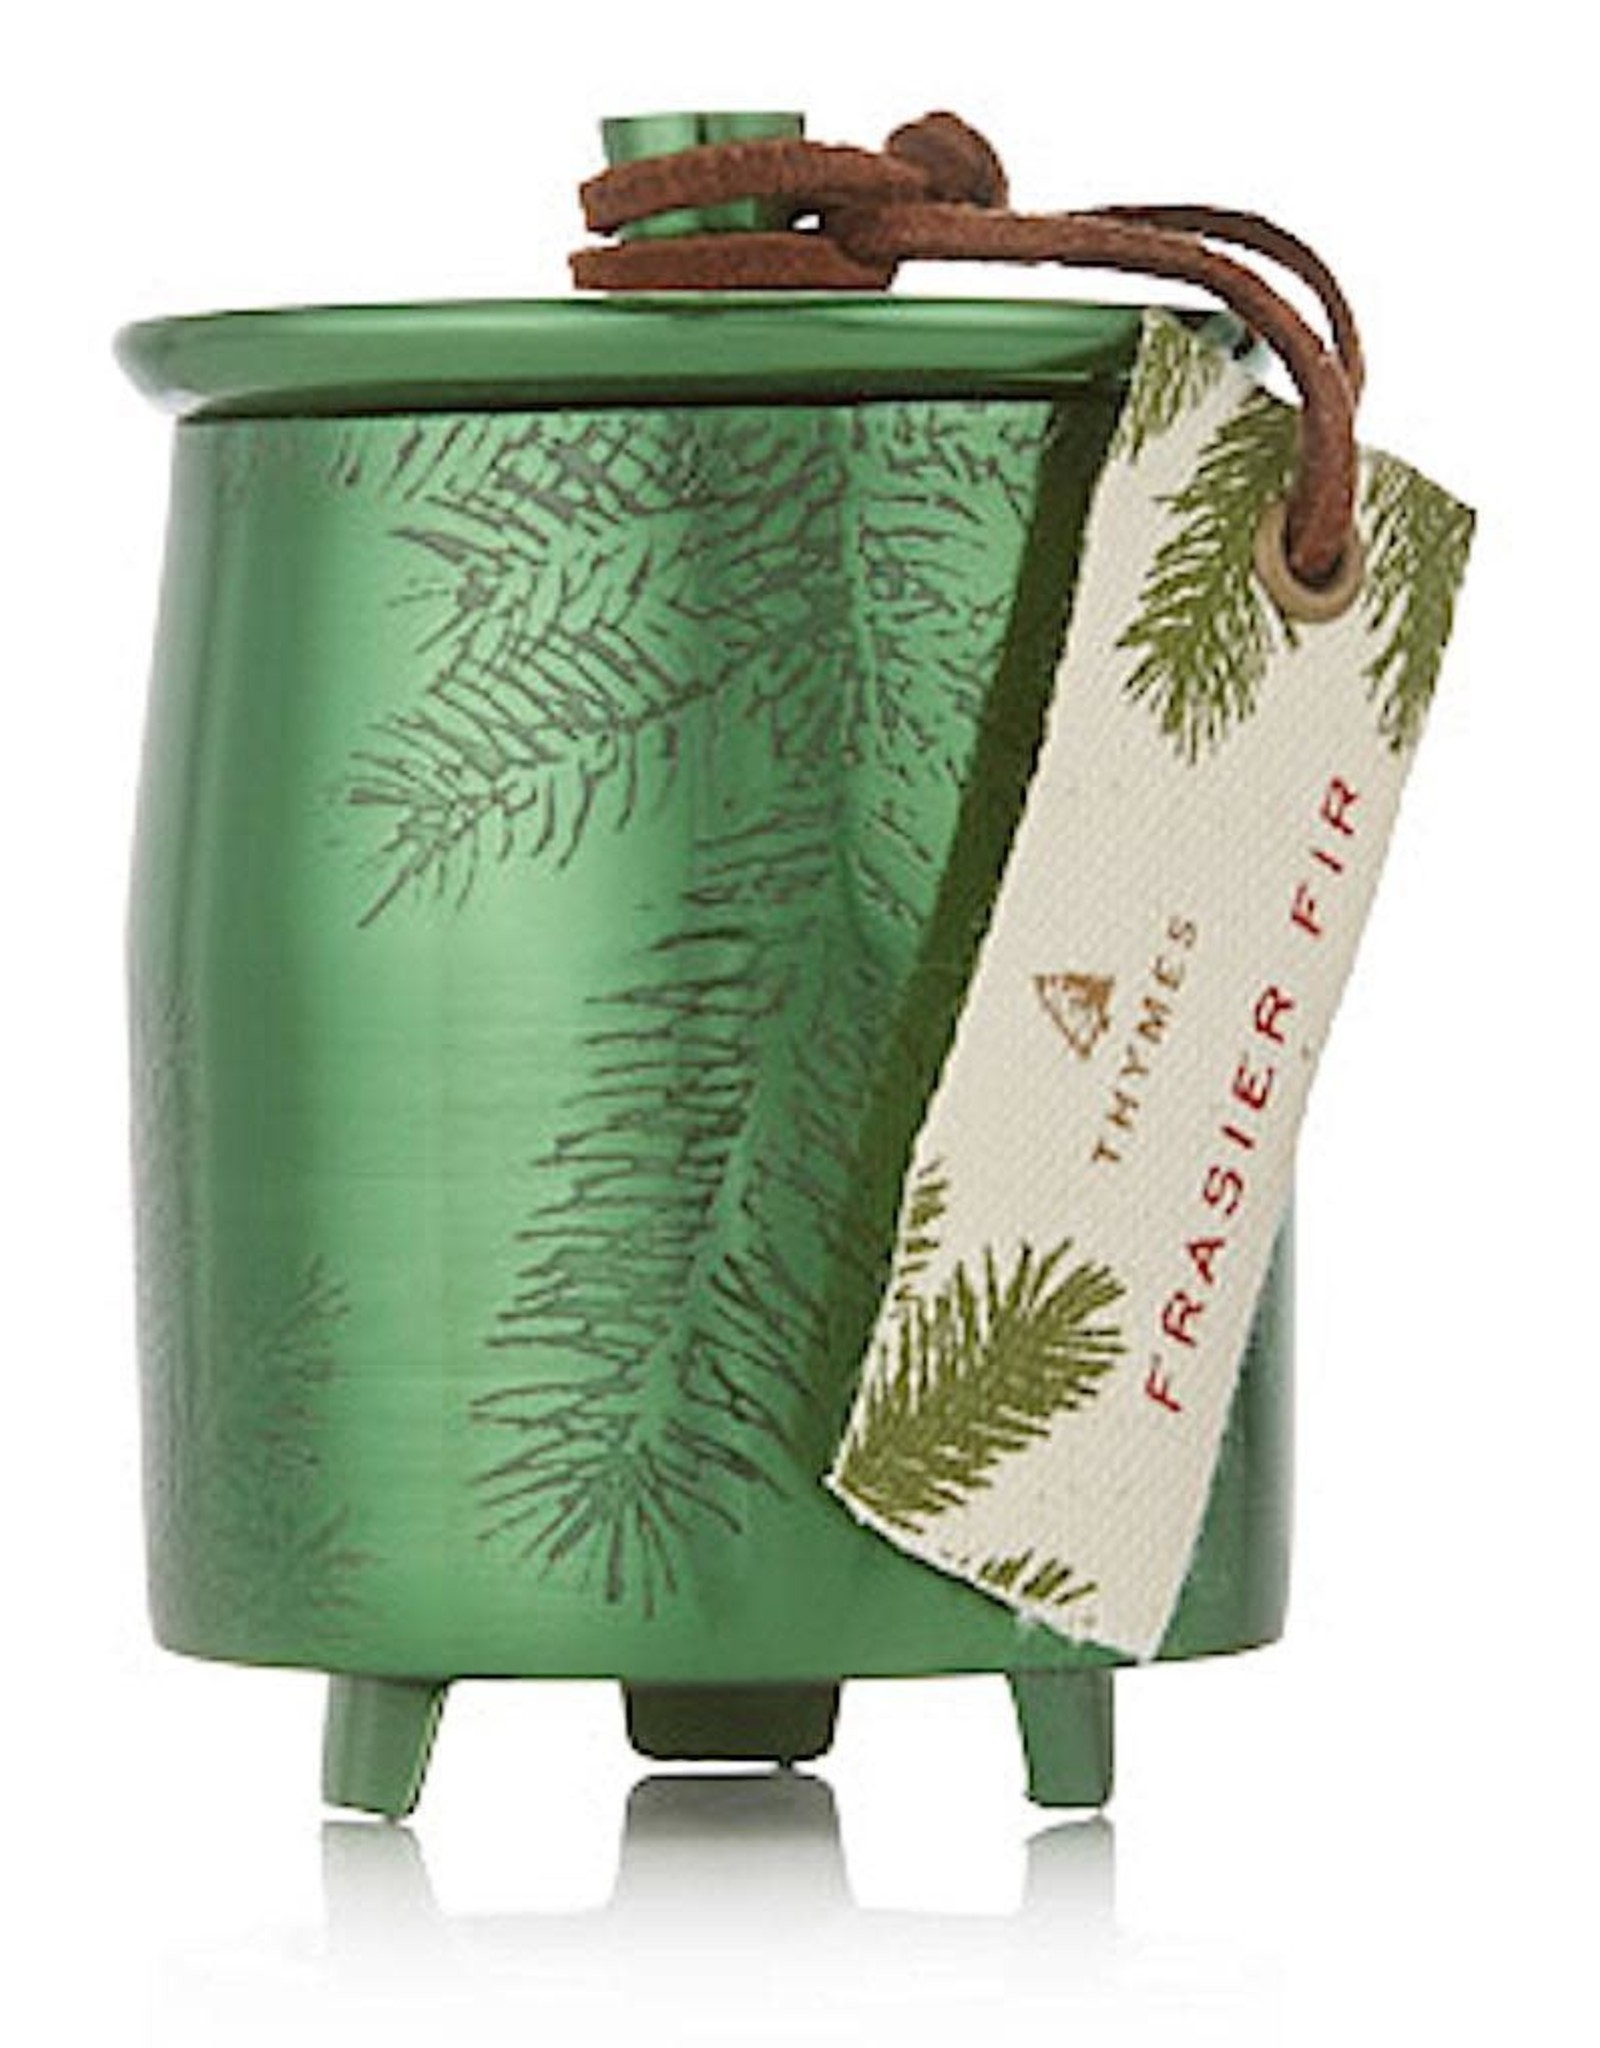 Frasier Fir Candle Small Green Metal Tin With Lid 4 Oz